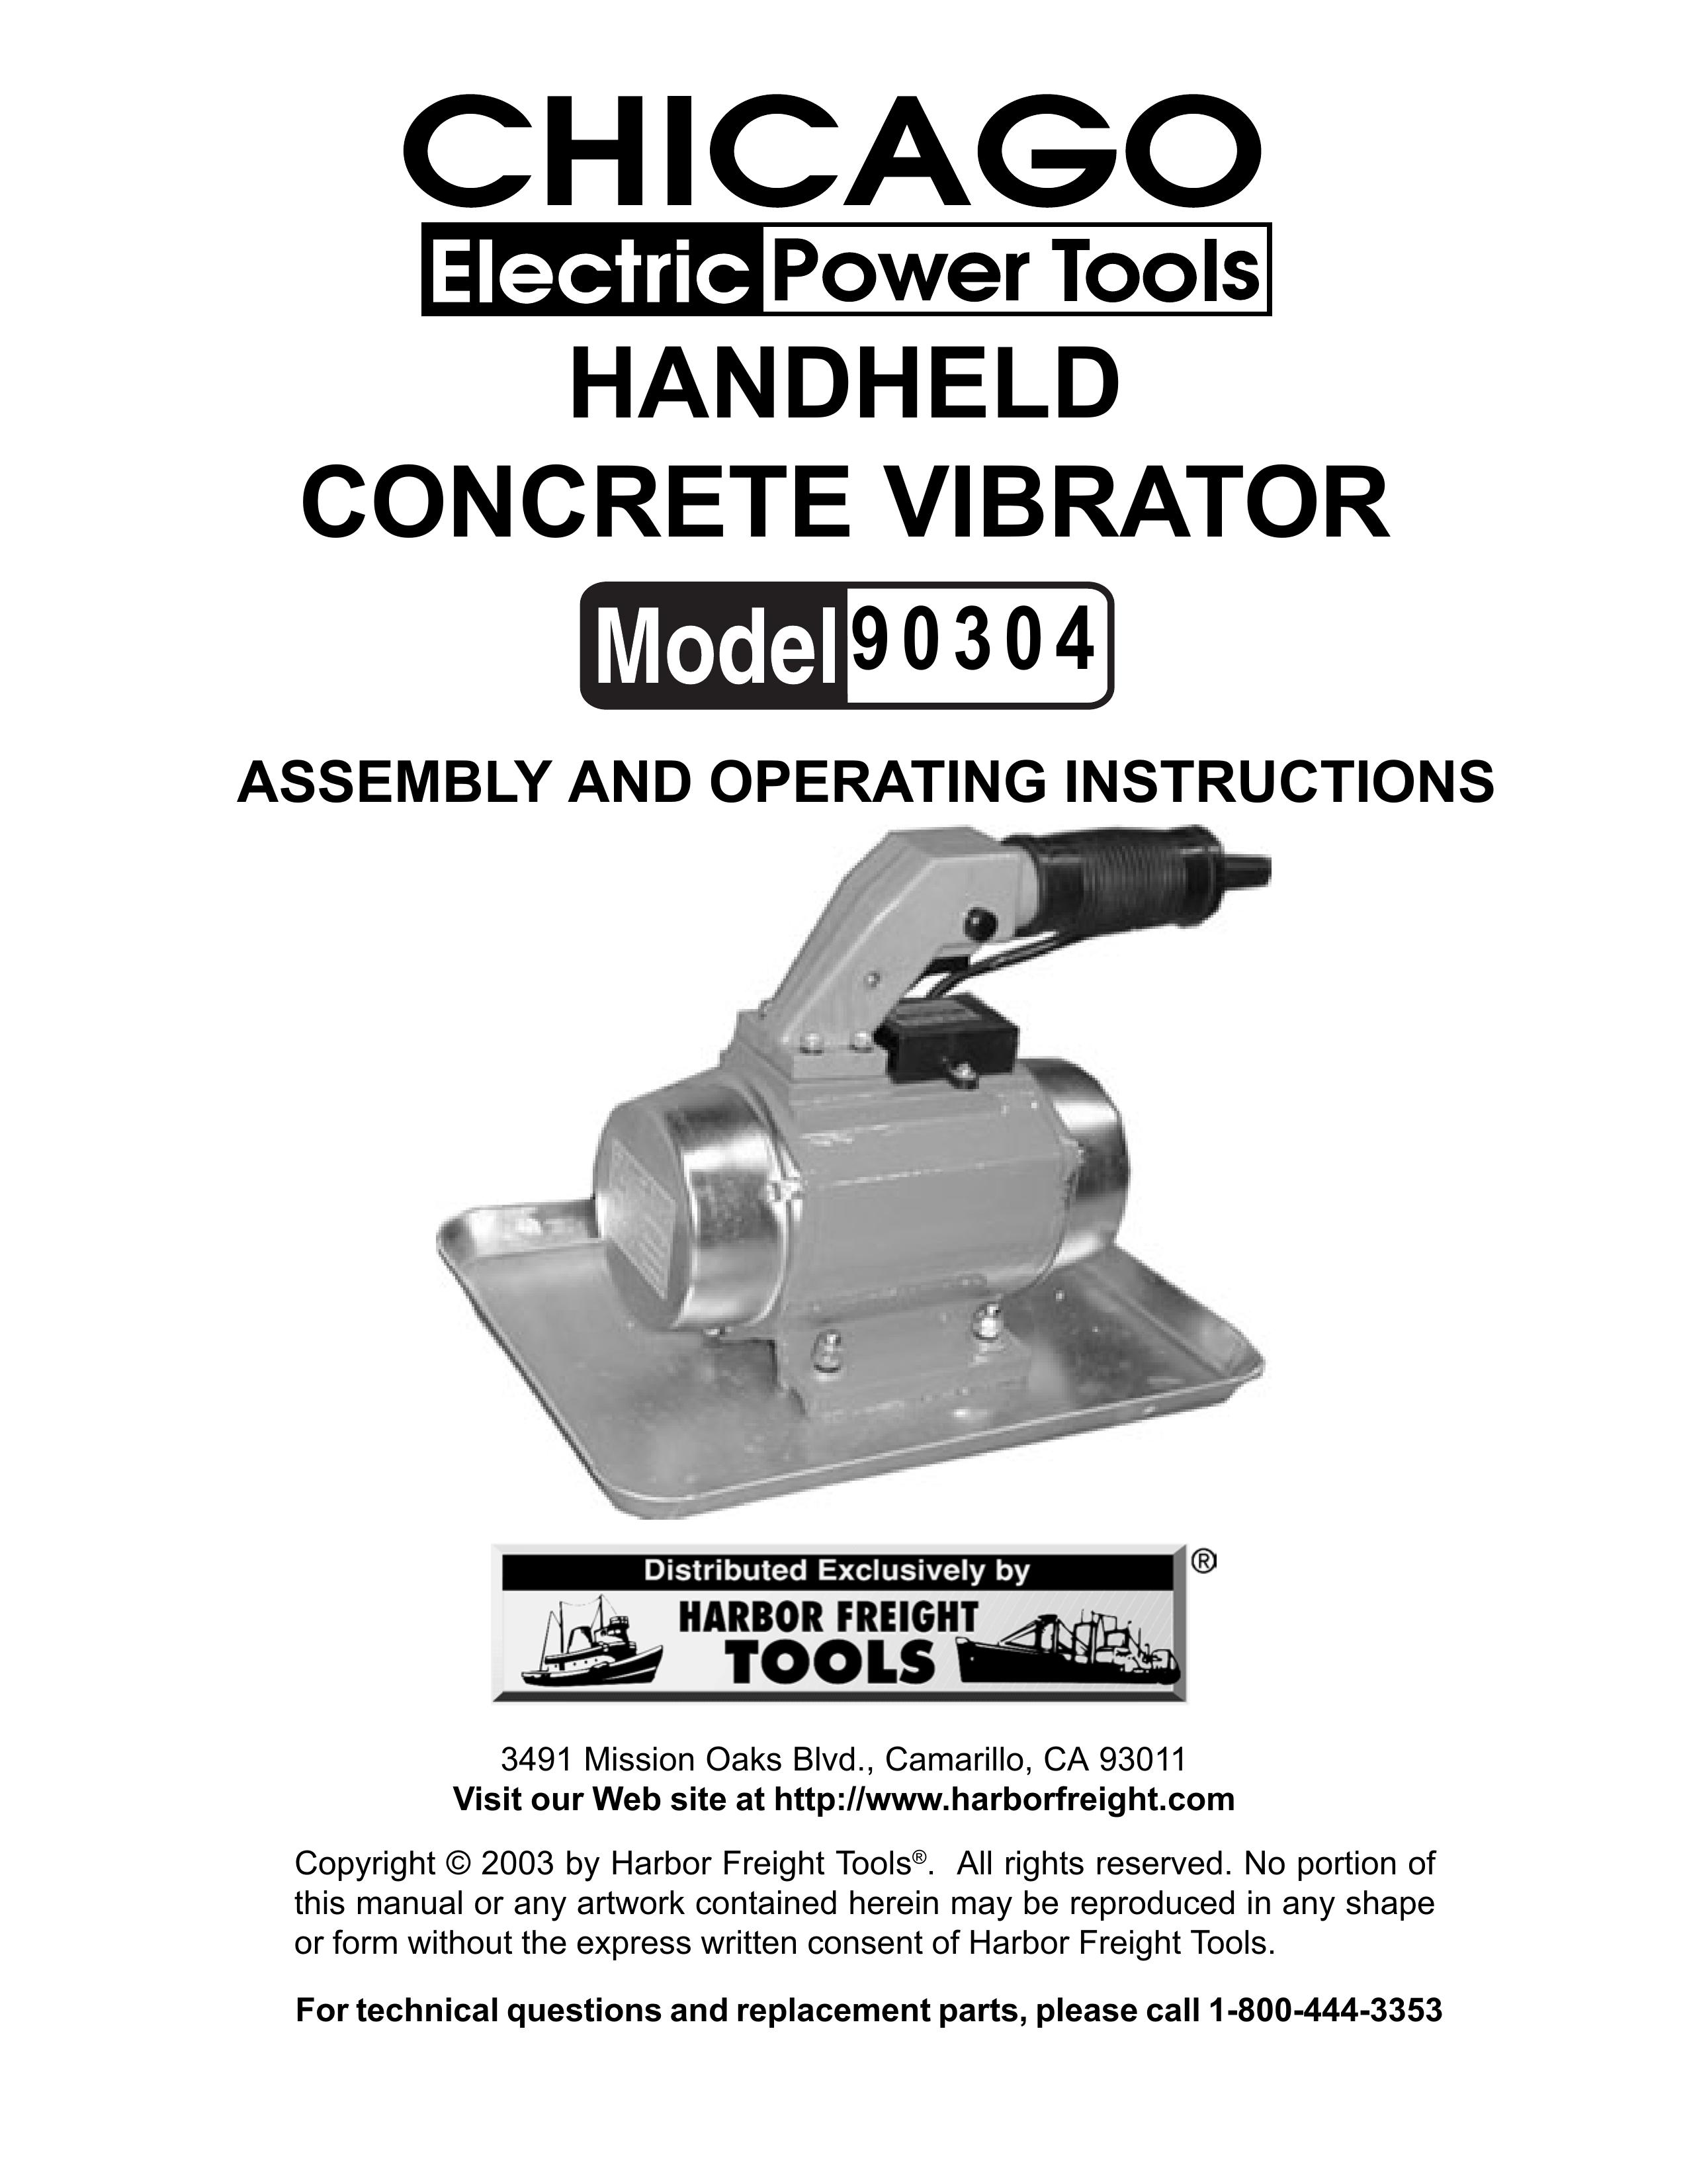 Harbor Freight Tools 90304 Spreader User Manual